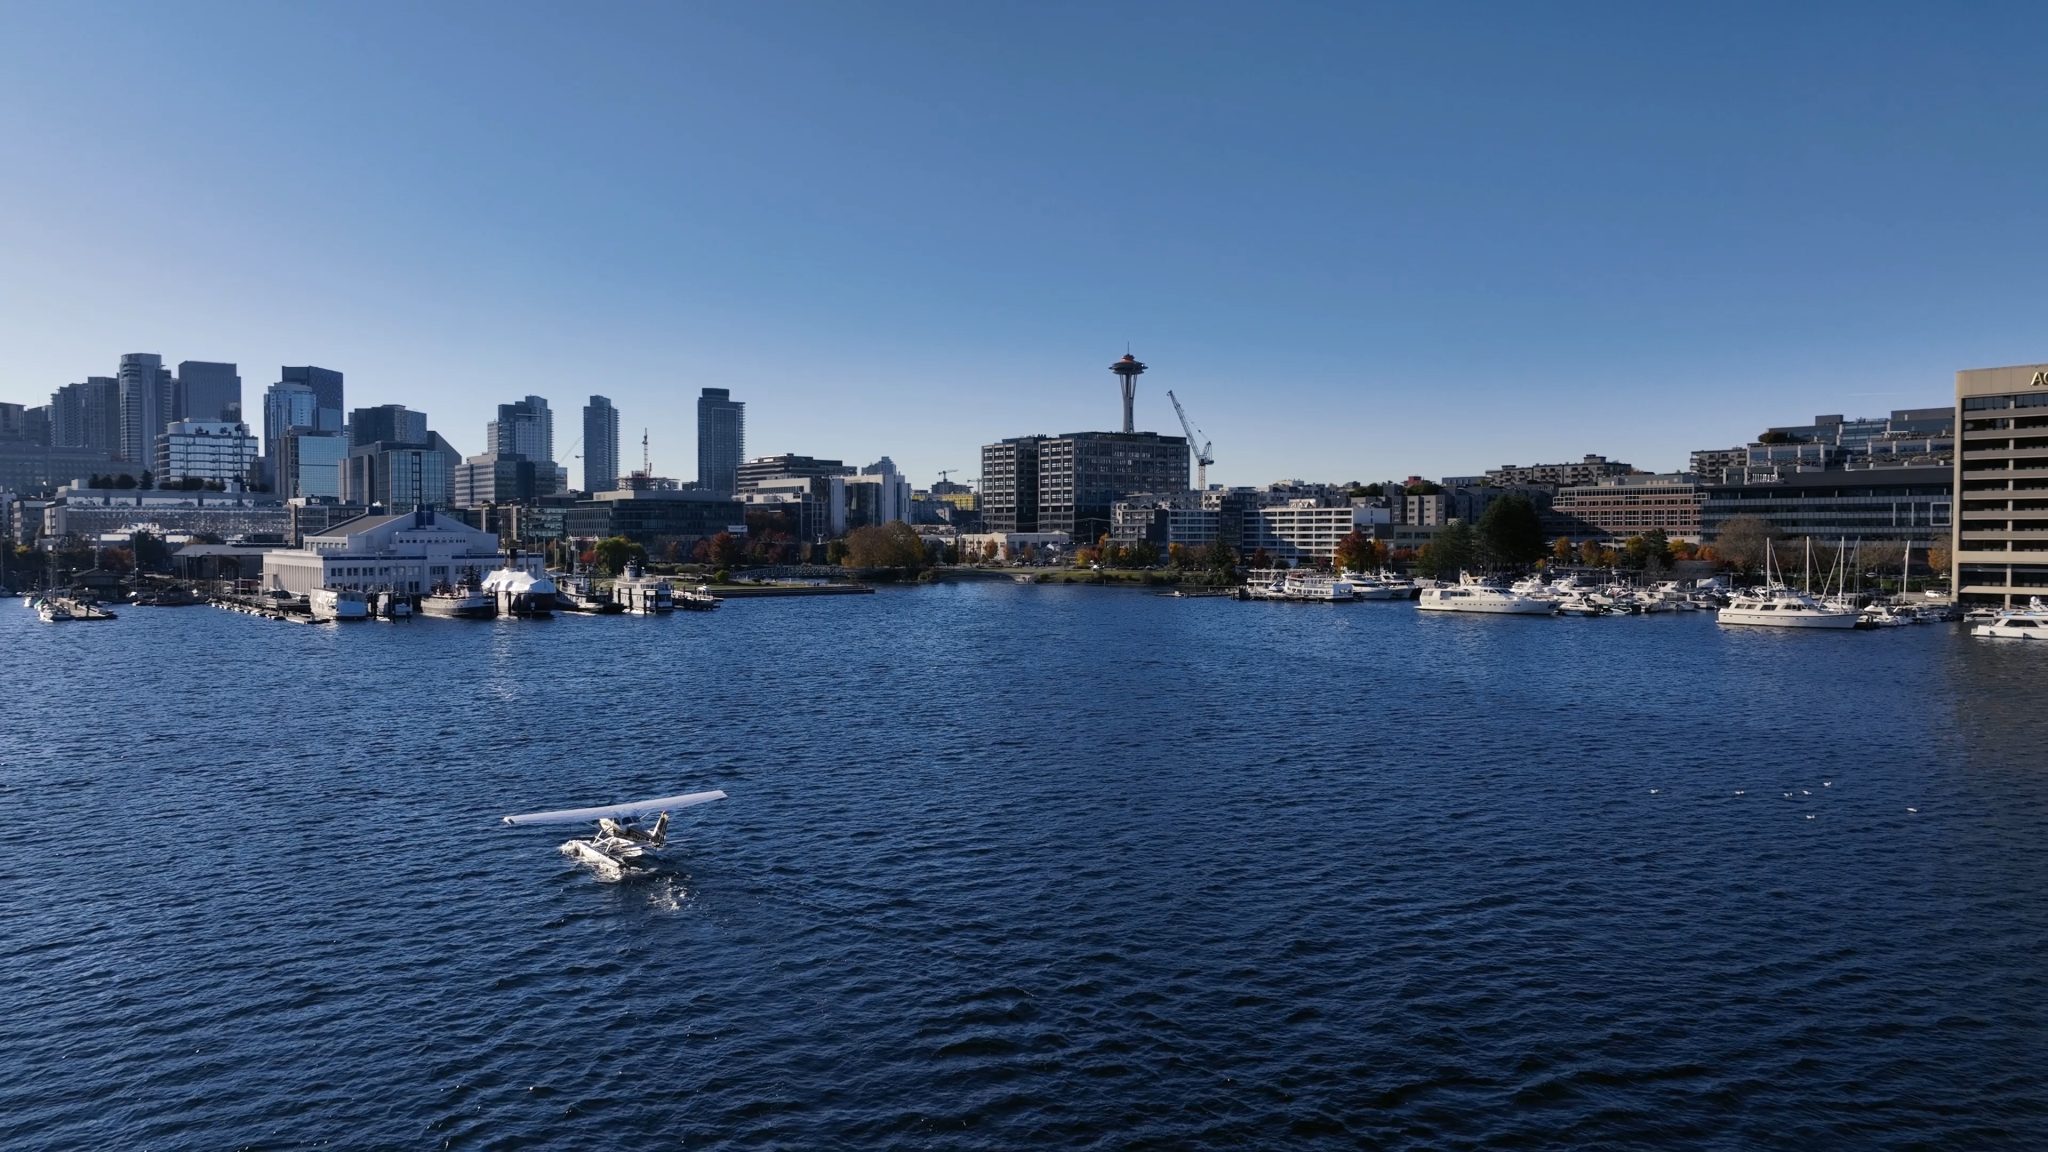 Airplane is landing on a lake with a Seattle needle skyline